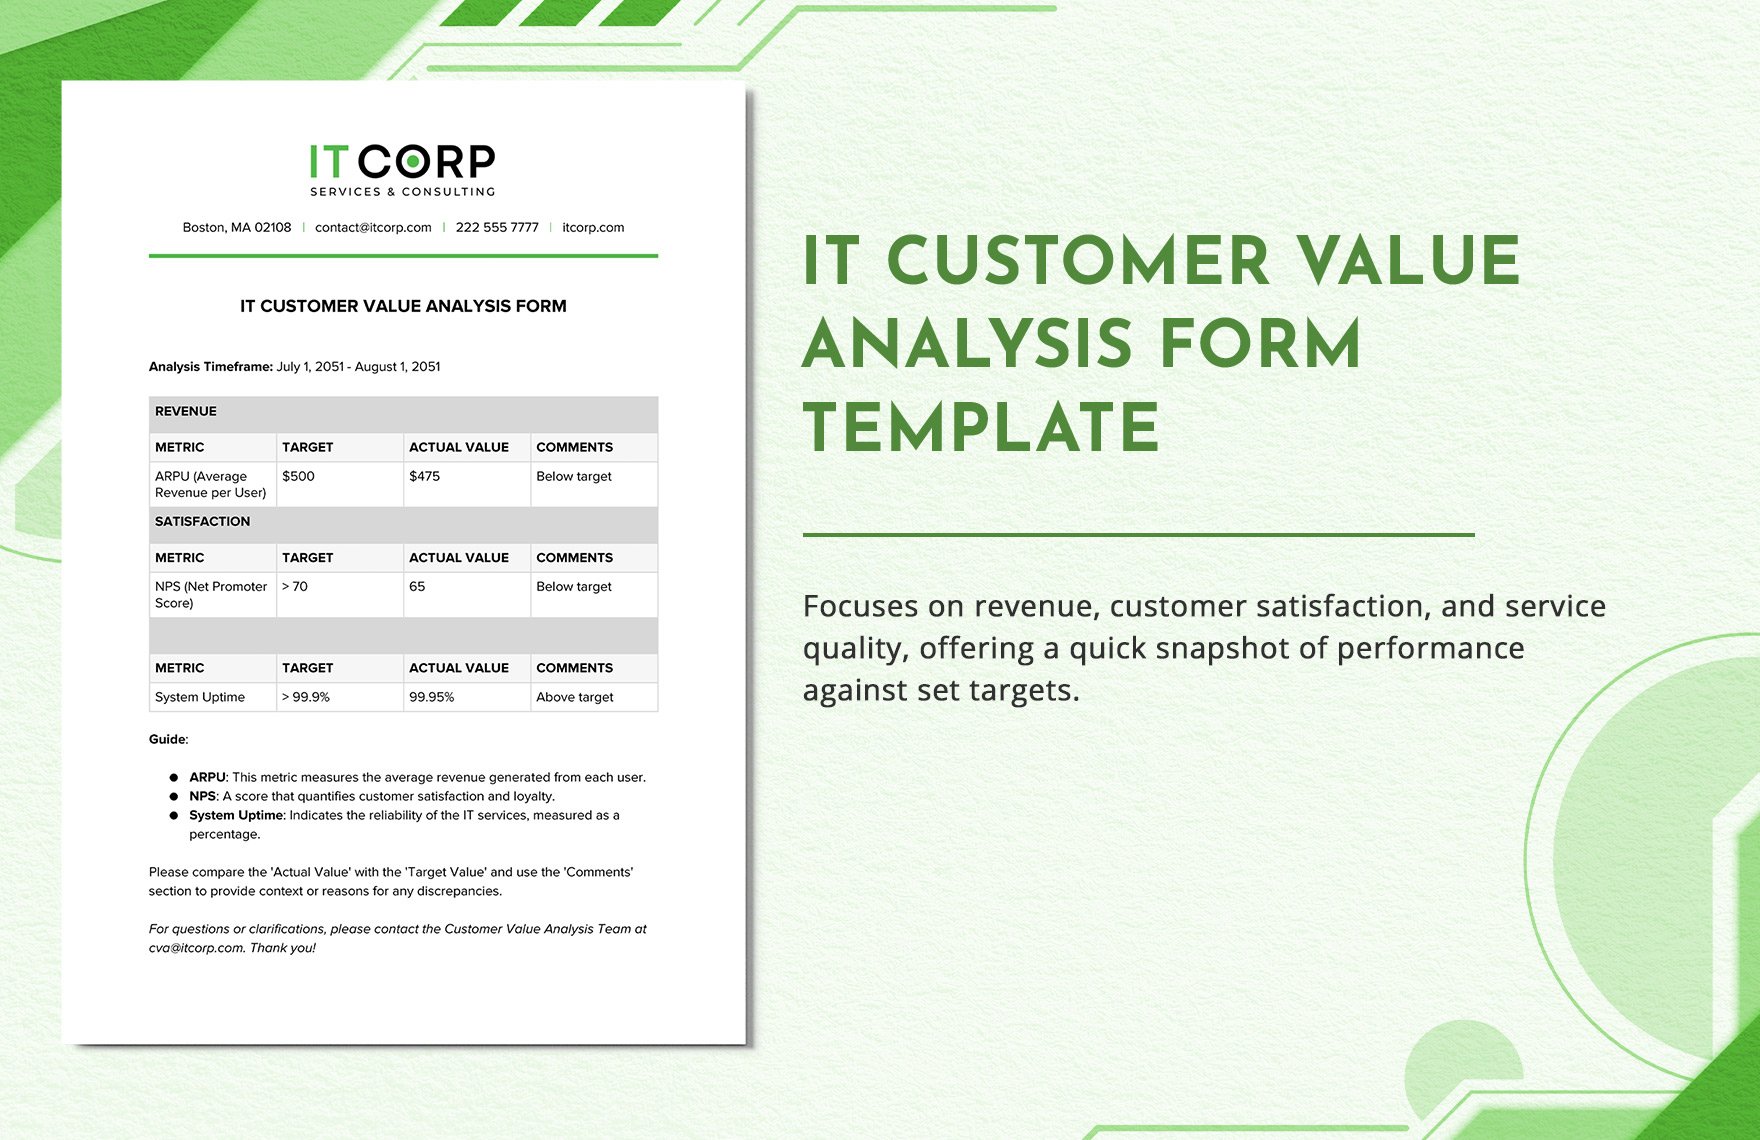 IT Customer Value Analysis Form Template in Word, Google Docs, PDF